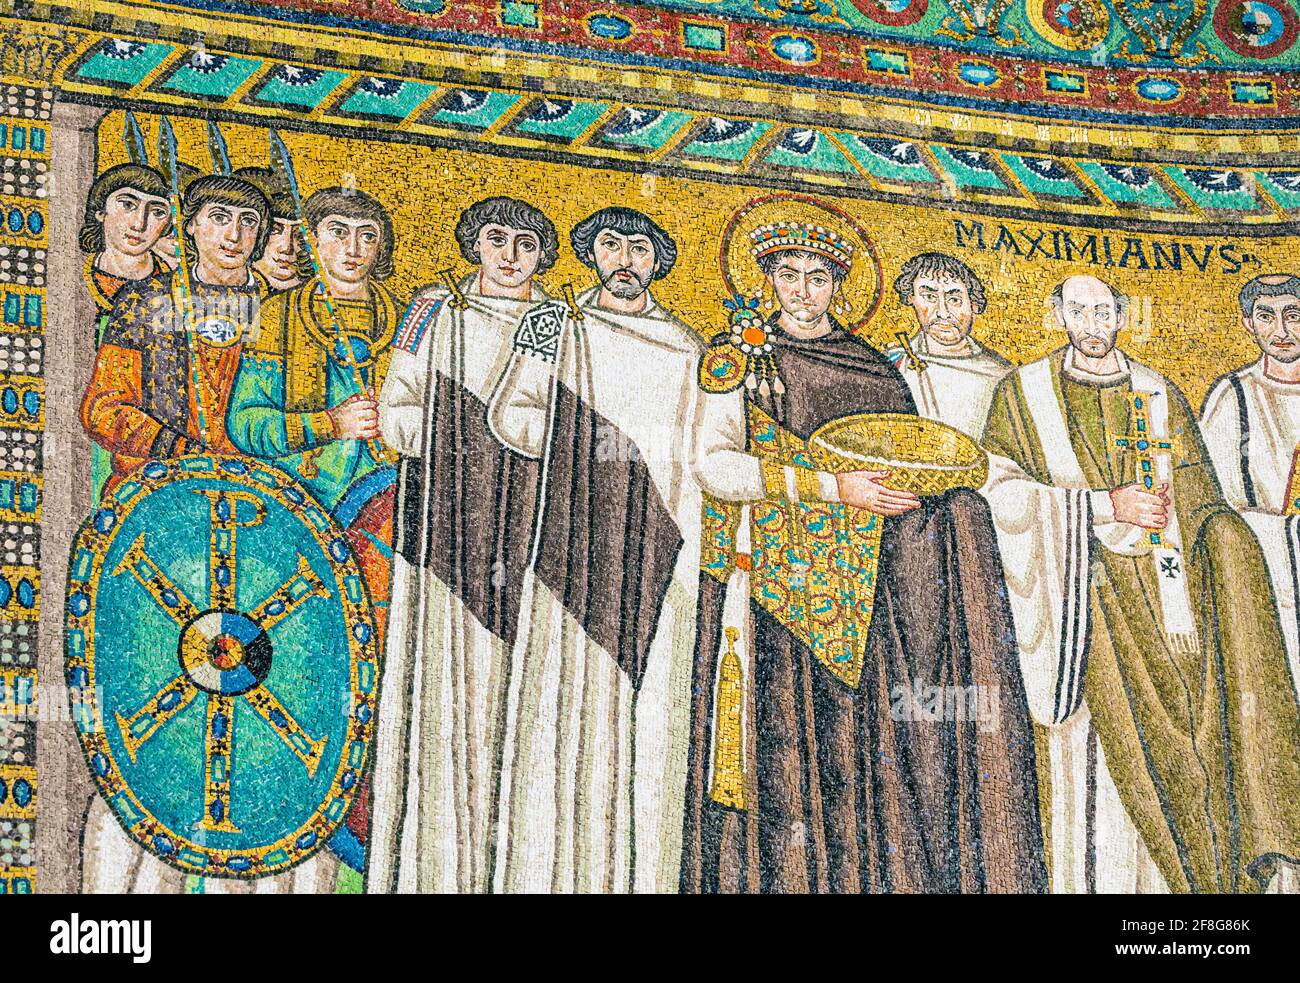 Ravenna, Ravenna Province, Italy. Mosaic in San Vitale basilica of Emperor Justinian I with members of his court. He is carrying a basket which possib Stock Photo